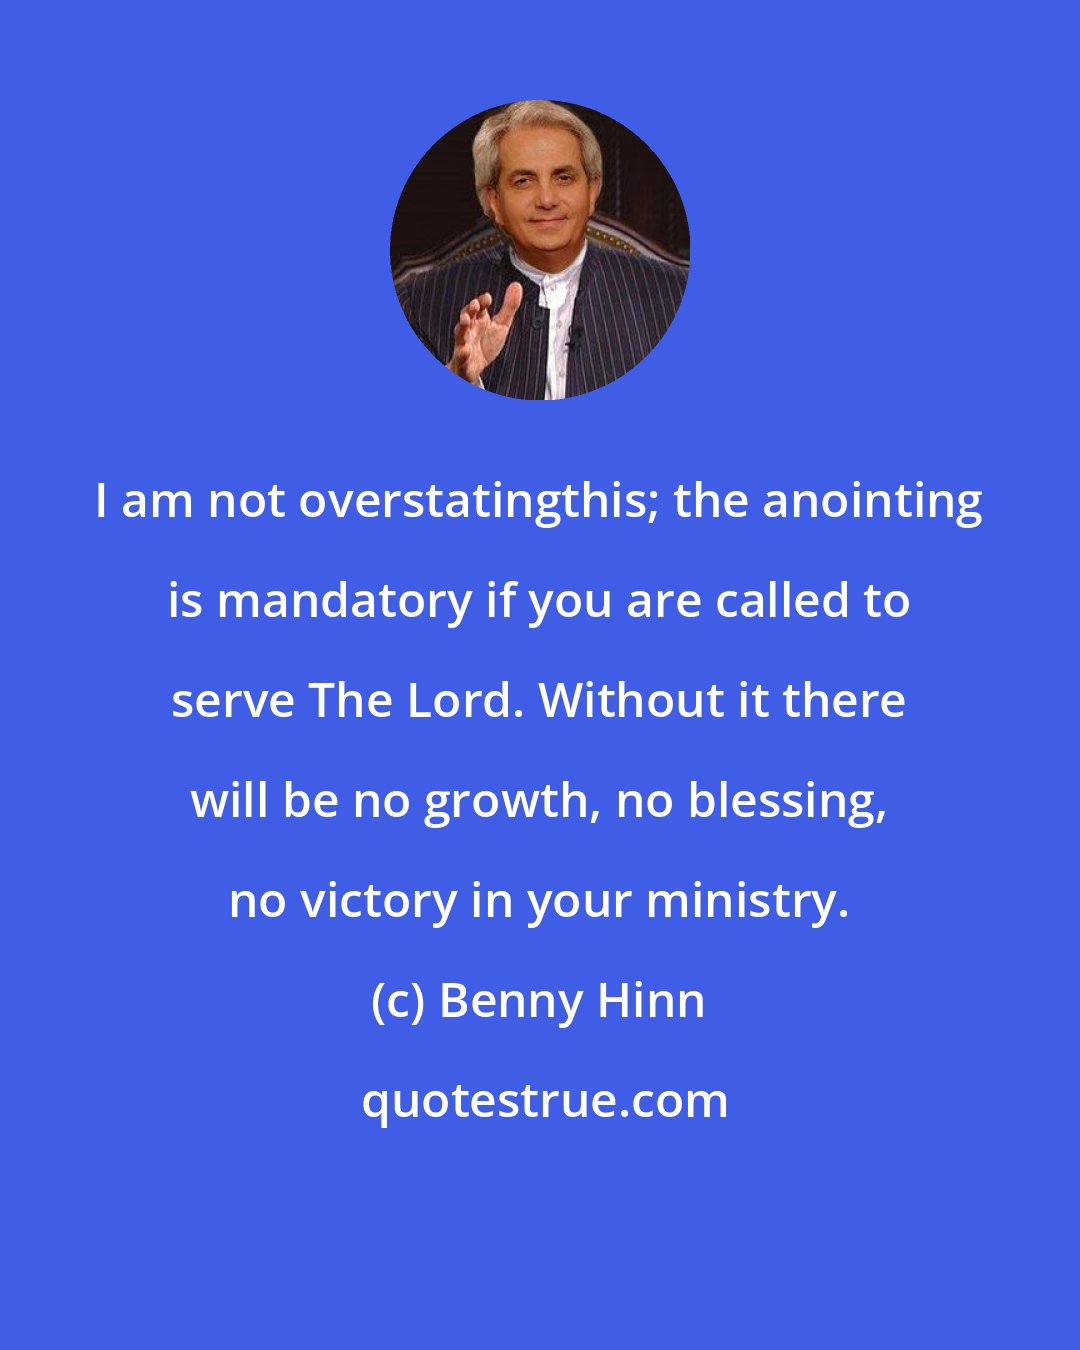 Benny Hinn: I am not overstatingthis; the anointing is mandatory if you are called to serve The Lord. Without it there will be no growth, no blessing, no victory in your ministry.